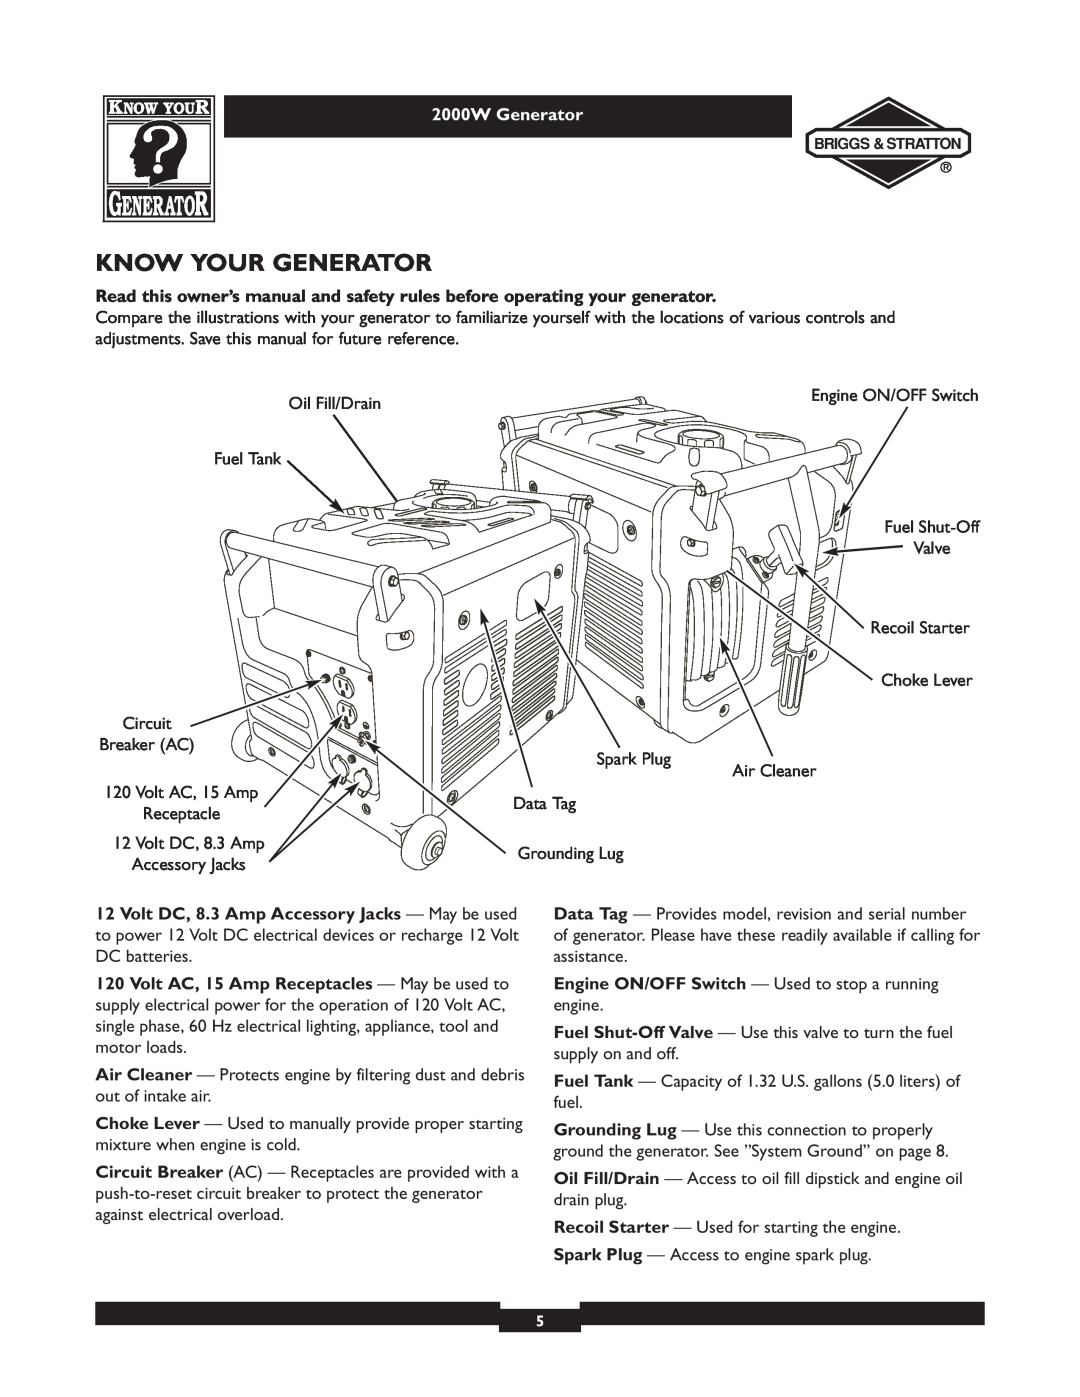 Briggs & Stratton 30239 owner manual Know Your Generator, 2000W Generator 